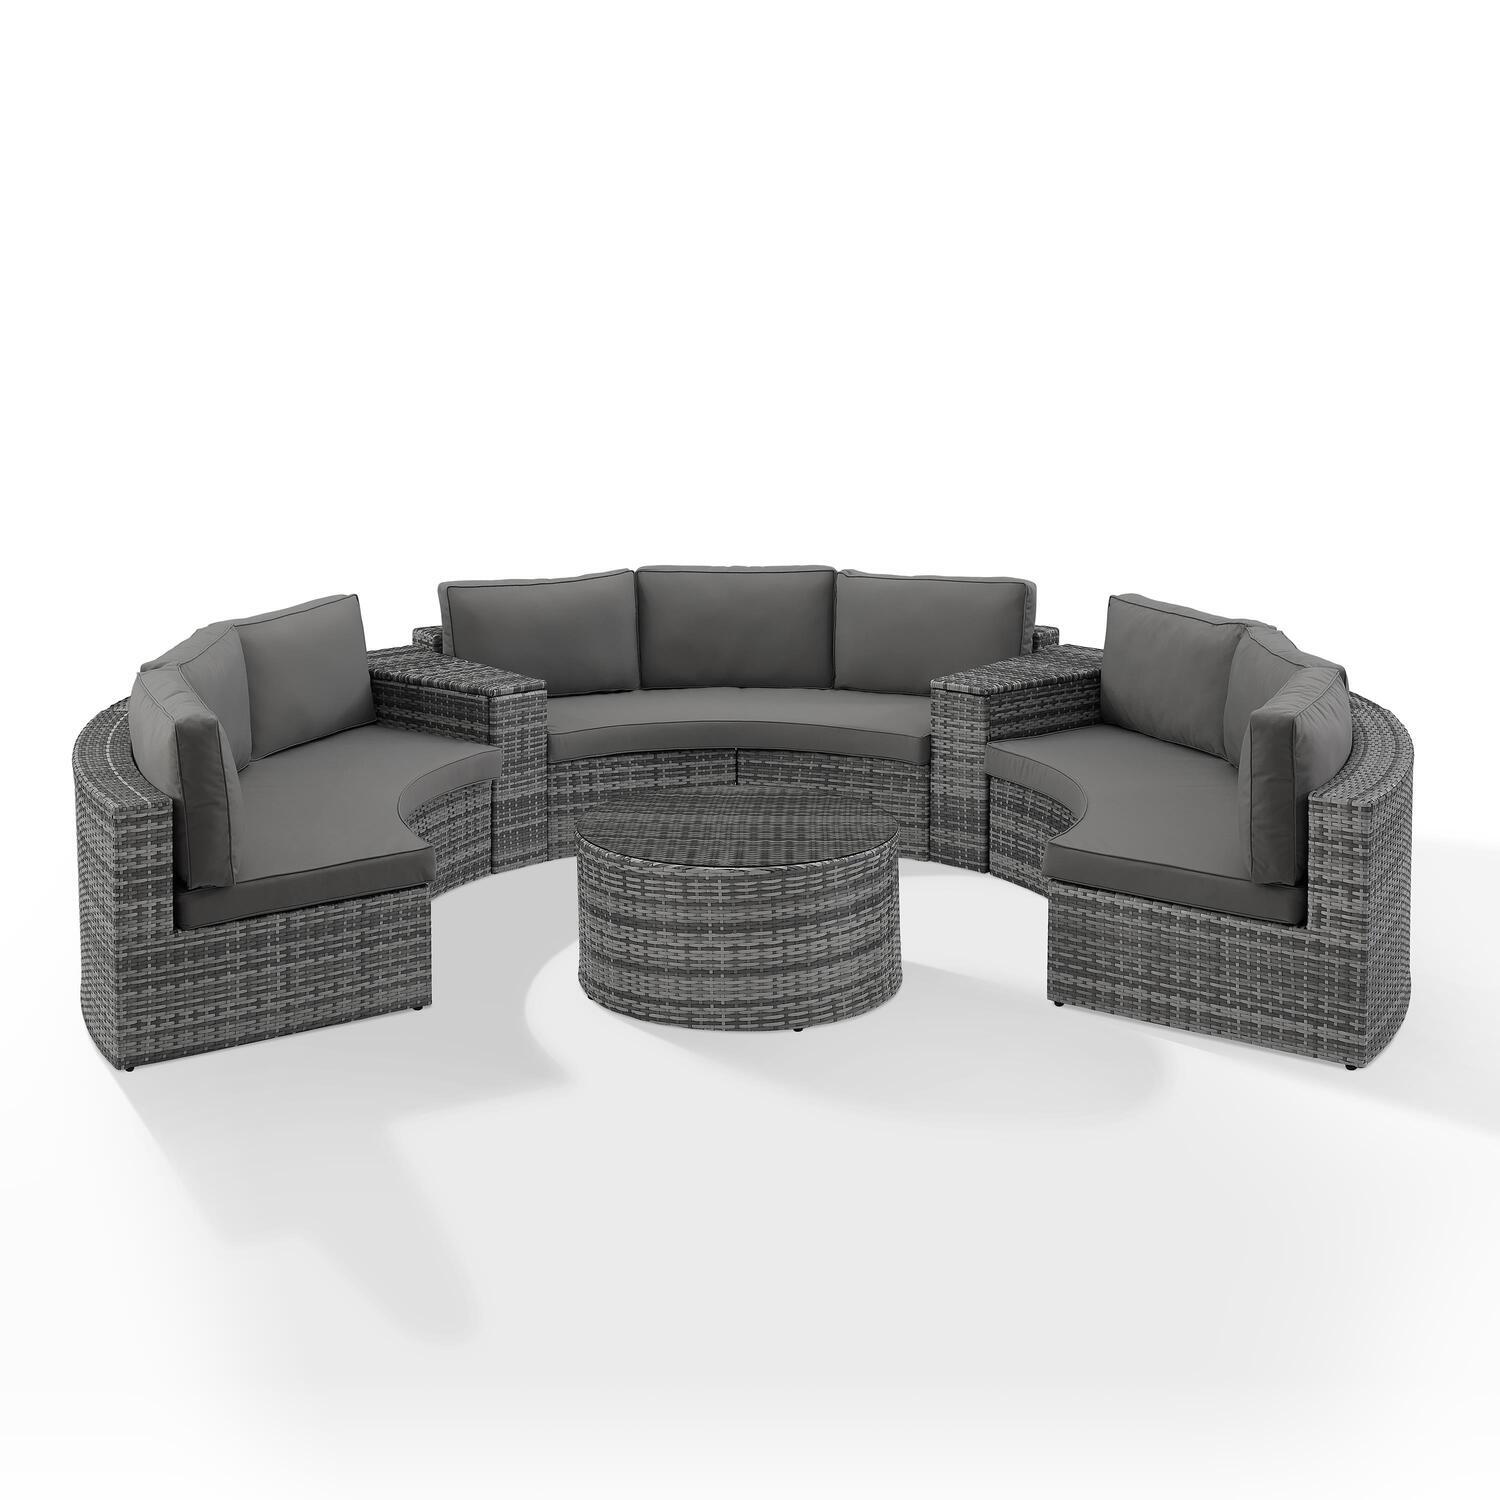 Catalina 6Pc Outdoor Wicker Sectional Set Gray/Gray - Round Glass Top Coffee Table, 3 Round Sectional Sofas, & 2 Arm Tables - image 1 of 8